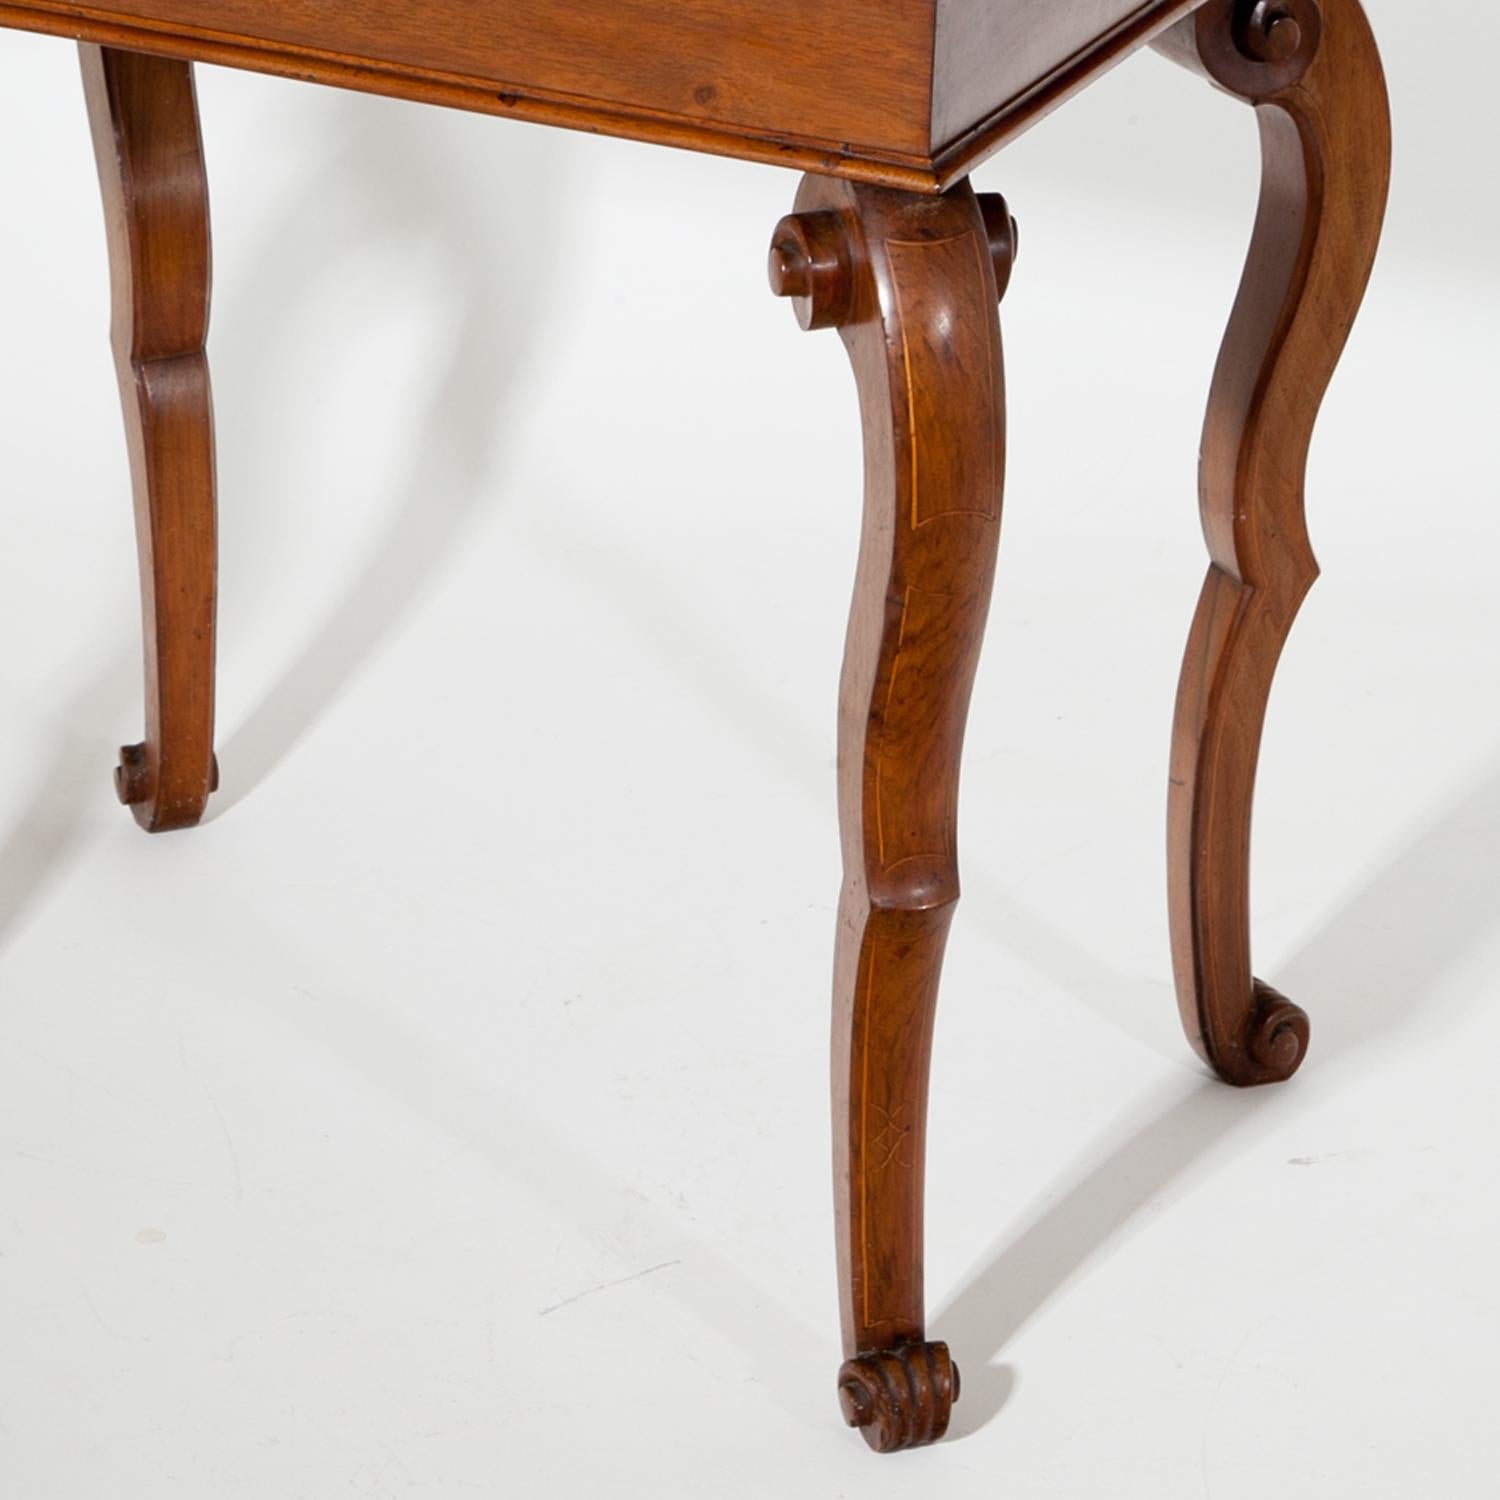 Baroque Table, Late 18th-Early 19th Century (Europäisch)